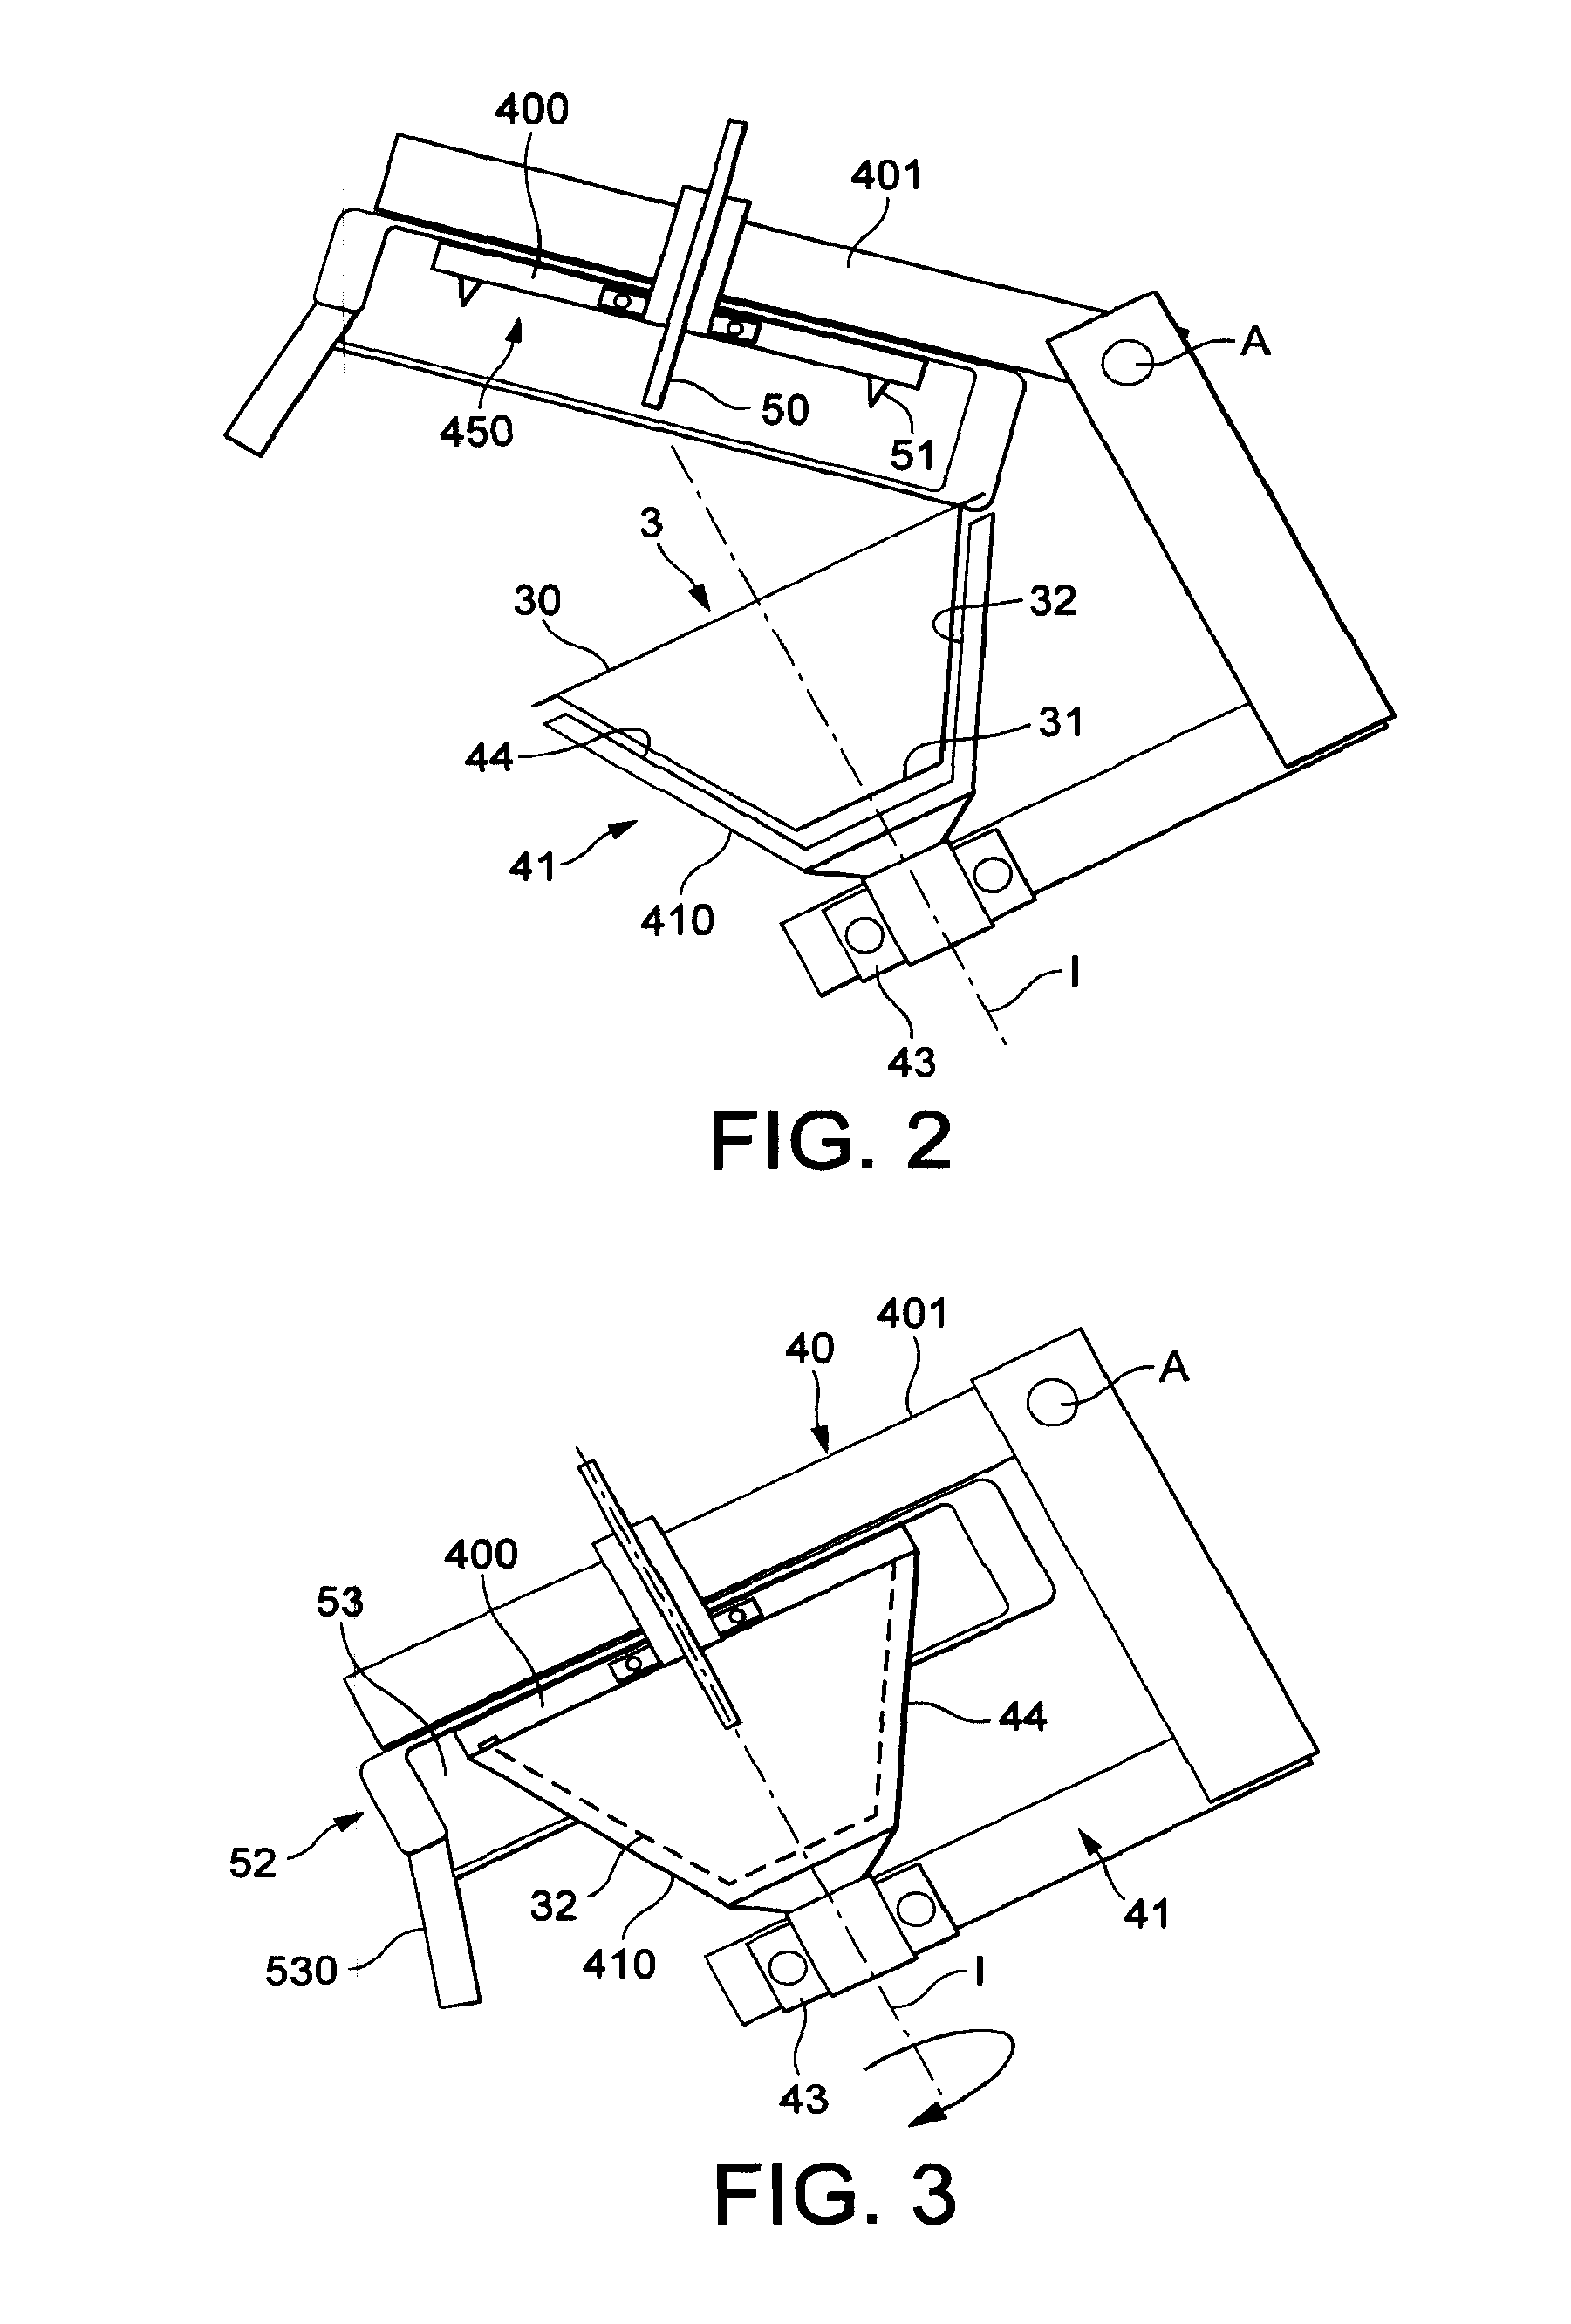 Capsule for preparing a beverage or liquid food and system using brewing centrifugal force